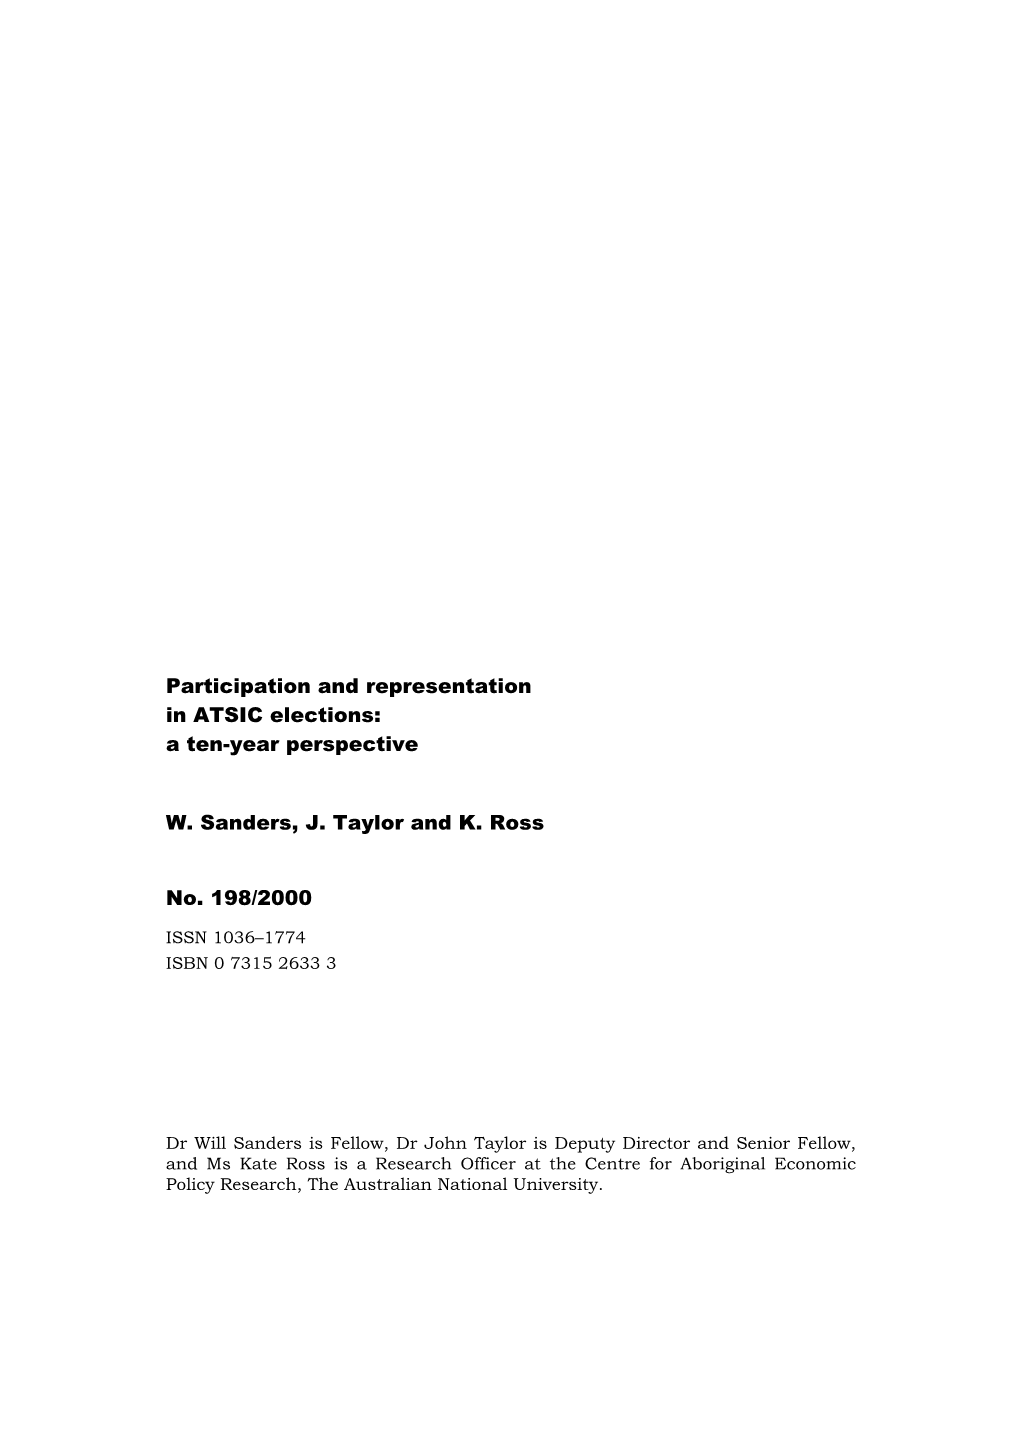 Participation and Representation in ATSIC Elections: a Ten-Year Perspective